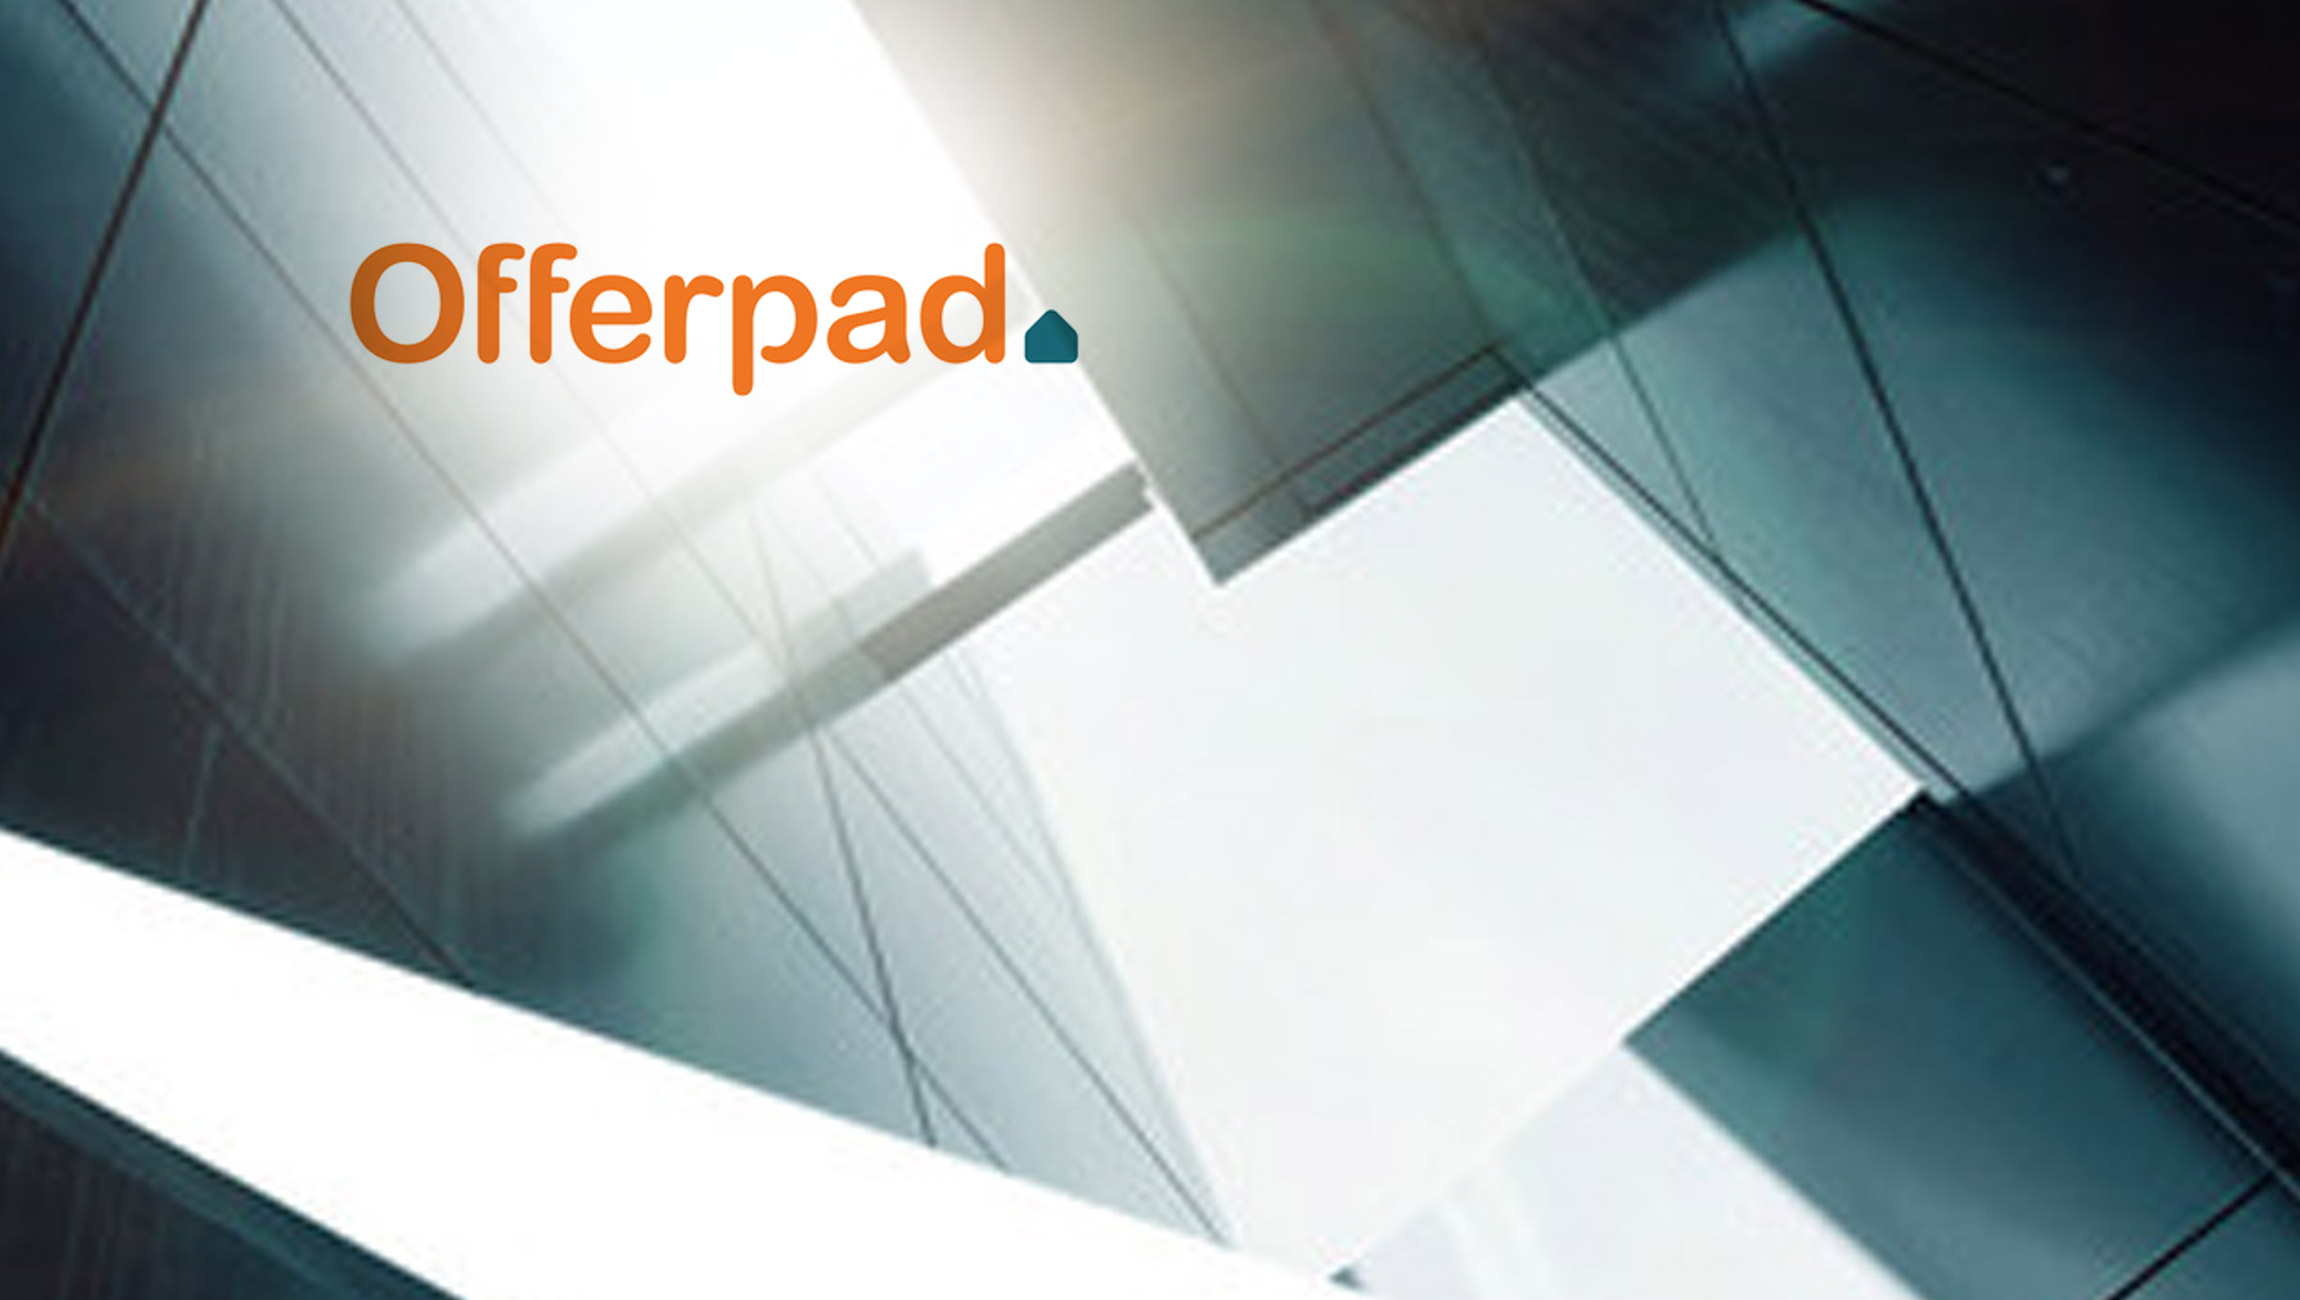 Offerpad Brings New Solutions to Residential Real Estate in Sacramento